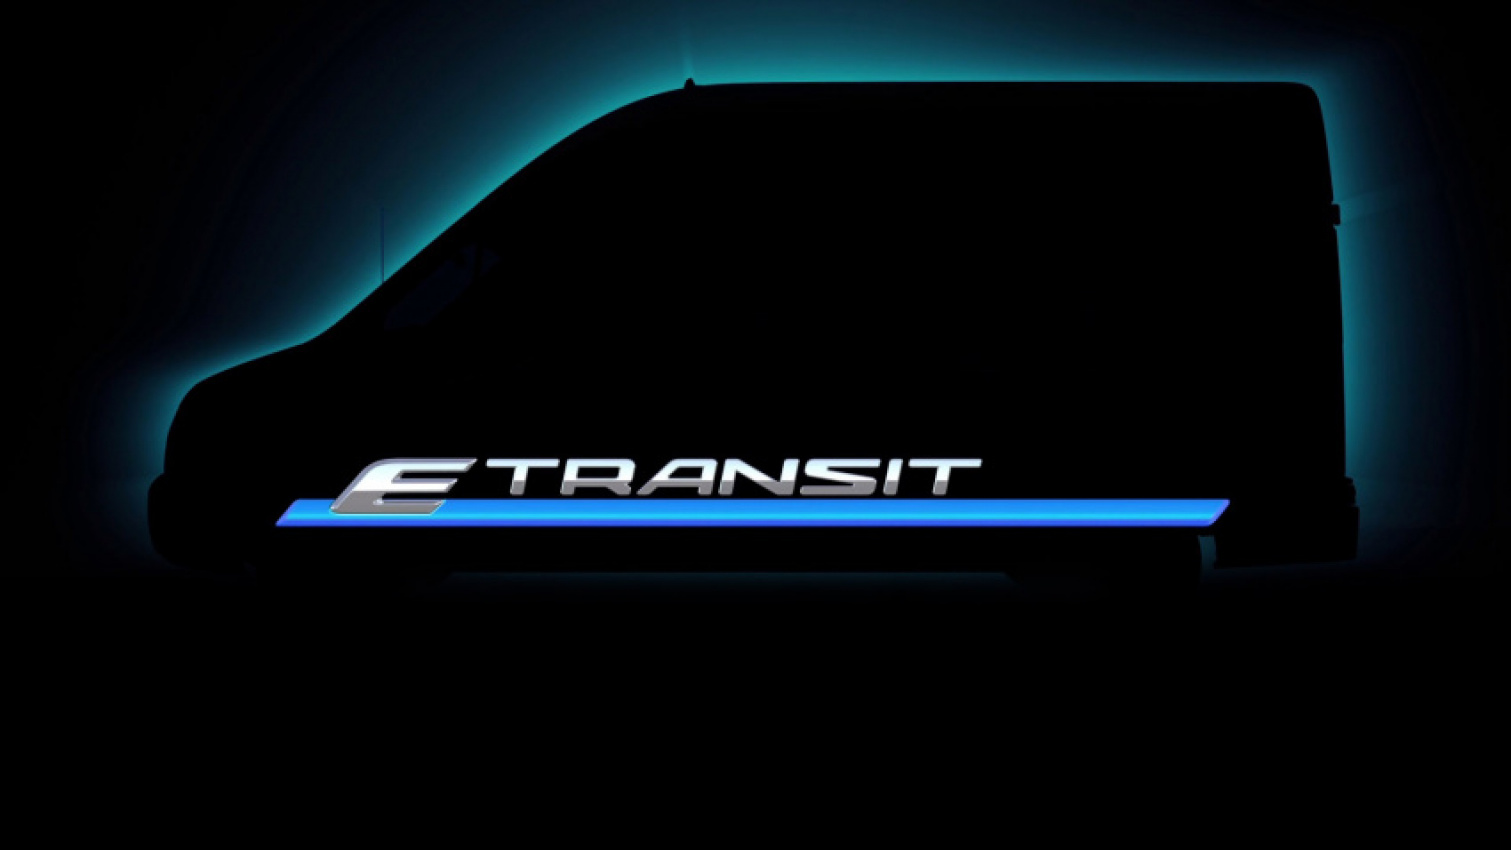 autos, cars, commercial vehicles, ford, e-transit, ford motor company, hau thai-tang, kumar galhotra, ford’s kansas city assembly plant to begin producing the all-new e-transit van